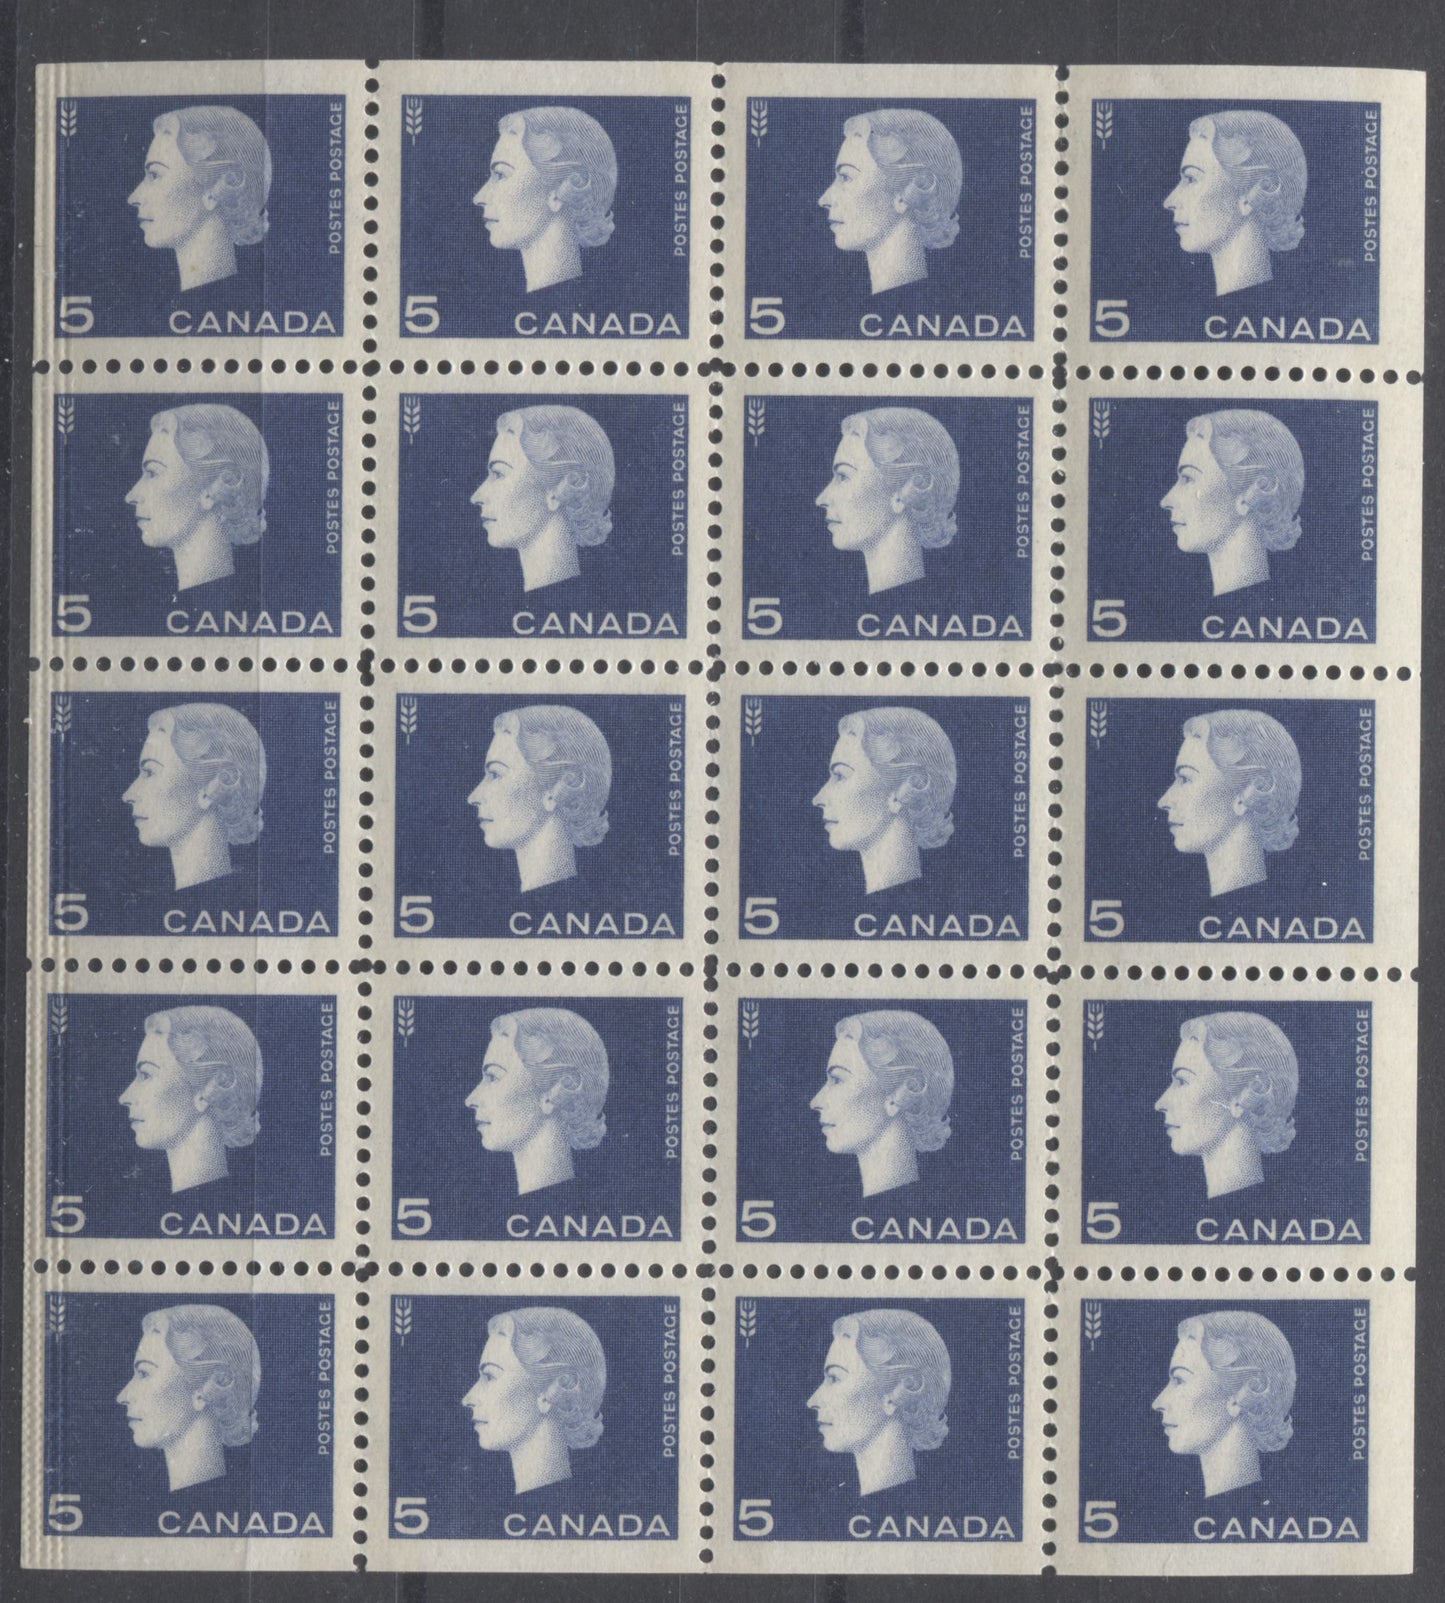 Lot 219 Canada #405q 5c Violet Blue Agriculture, 1962-1963 Cameo Issue, A VFNH Winnipeg Tagged Cello Paq Pane Of 20 With Left Stamps Showing Crimping From The Sealing Of The Pack, Very Light Bluish White Under Shortwave UV